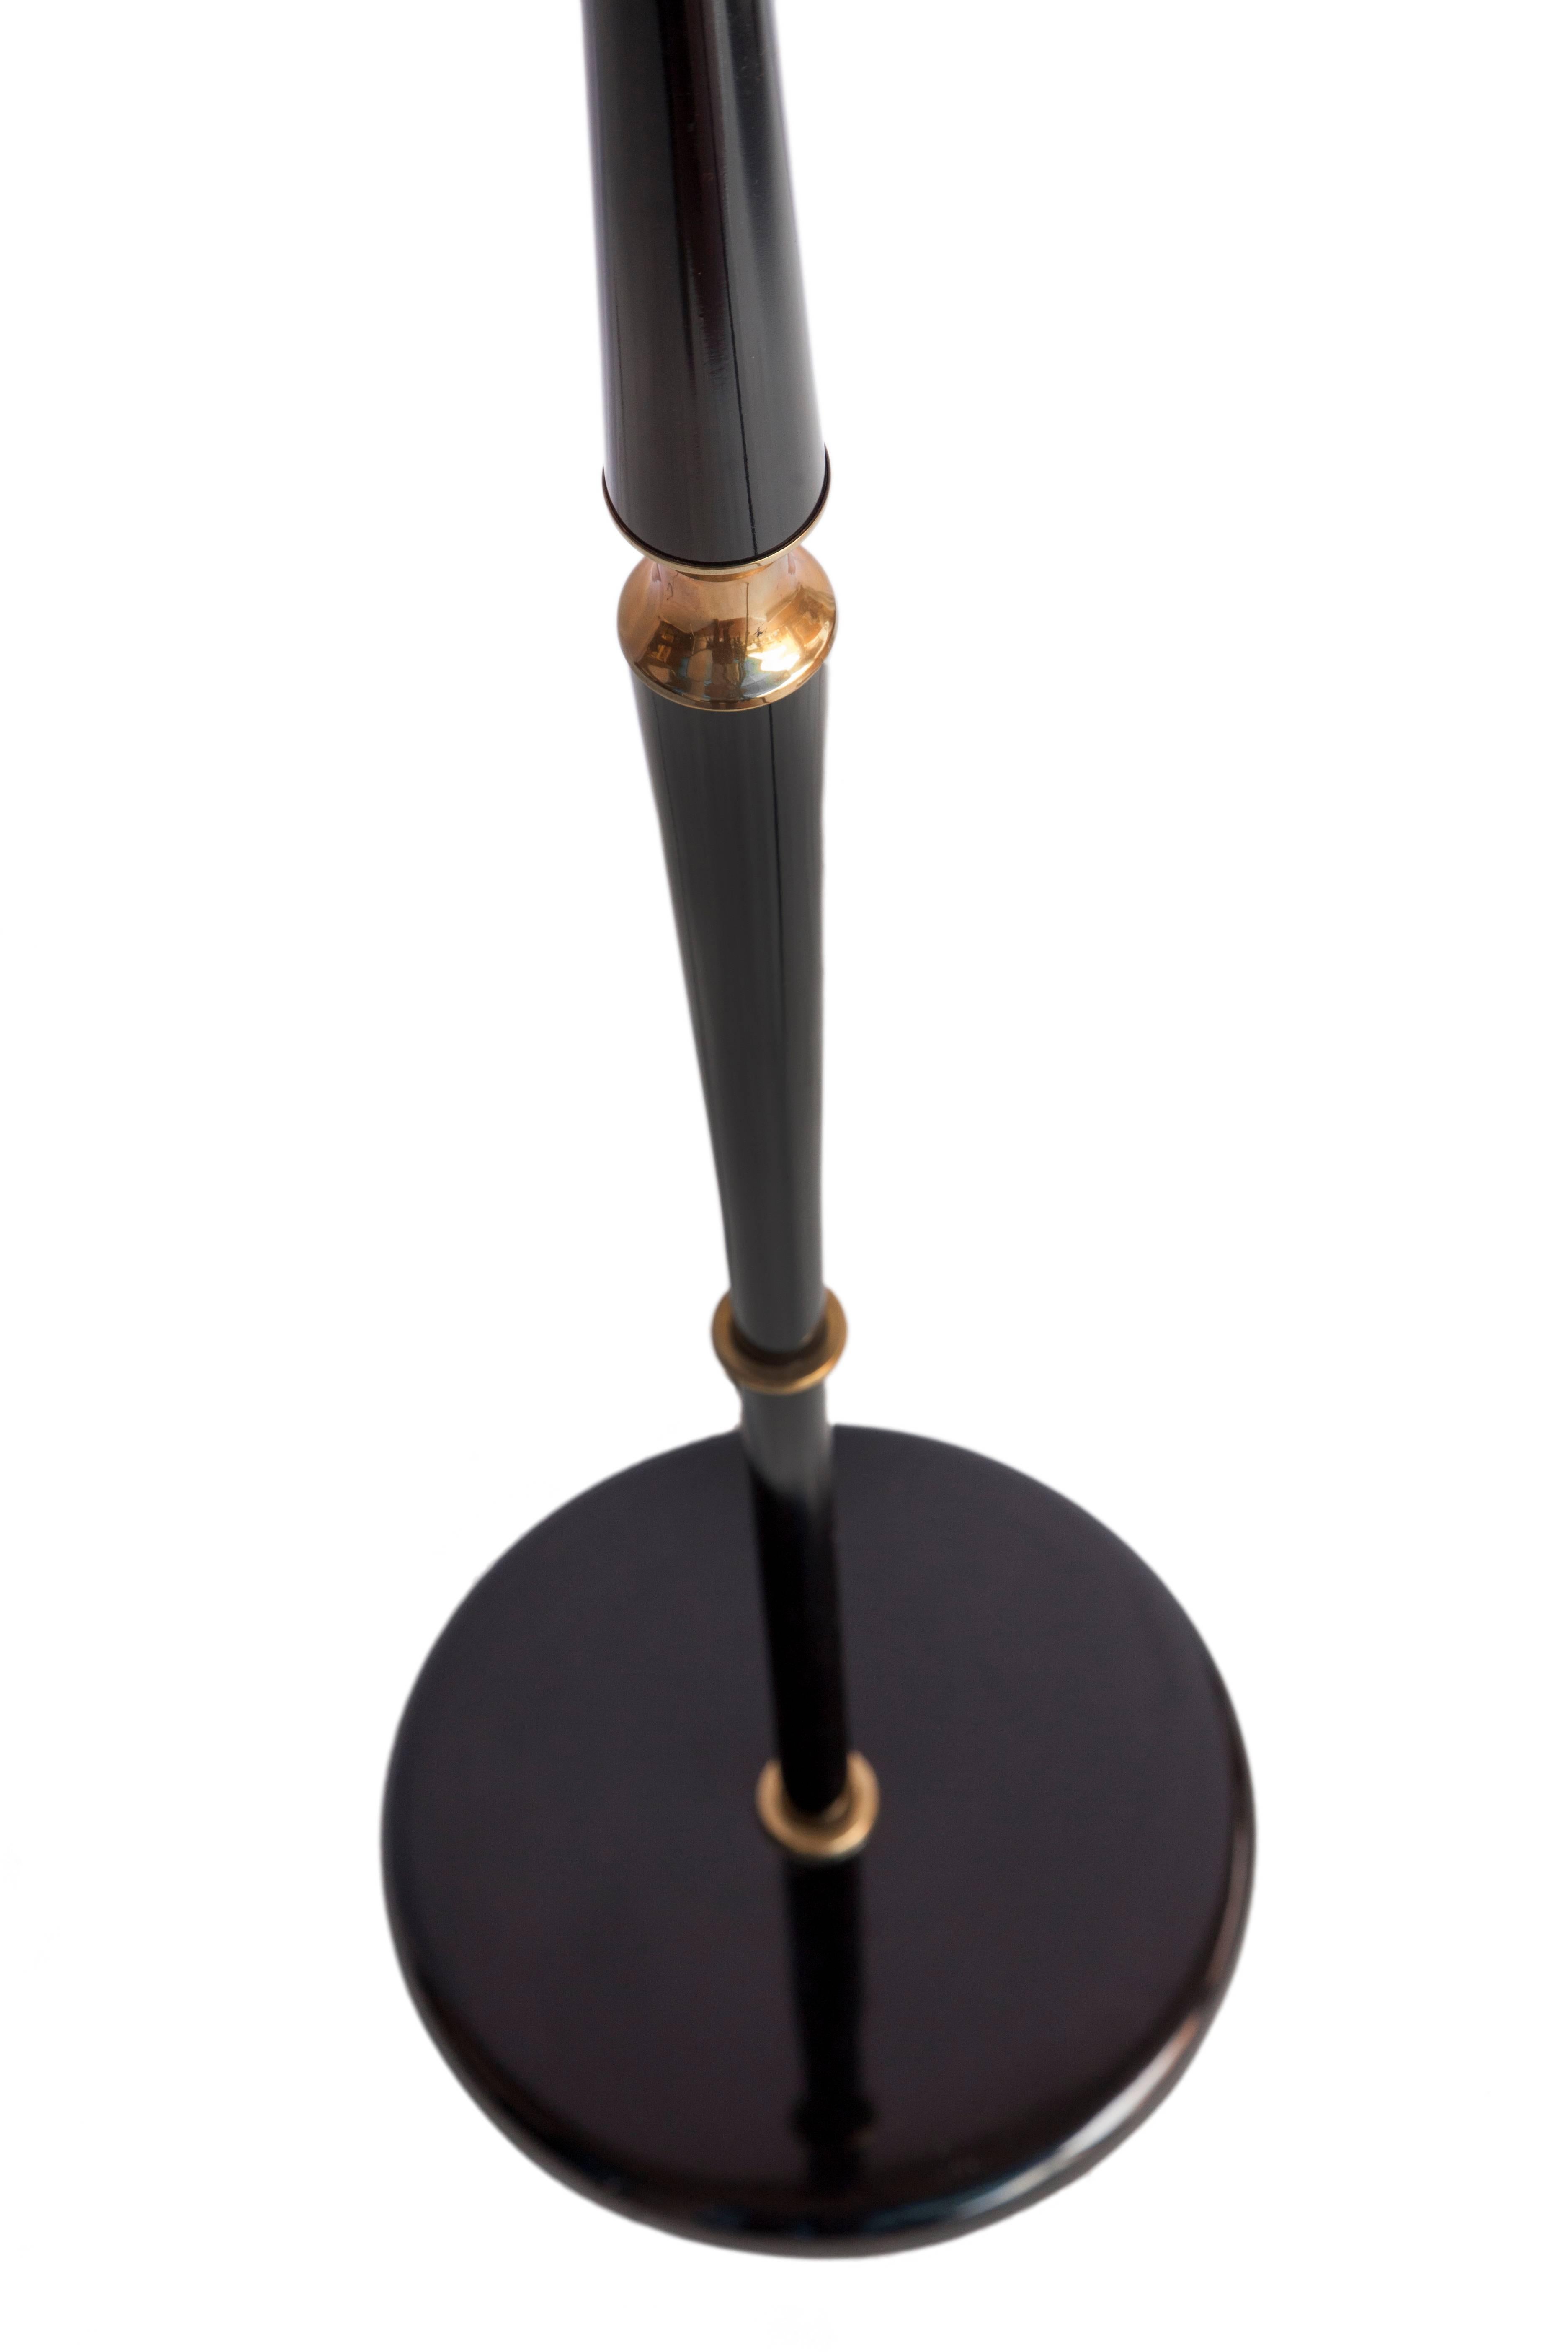 Painted Brazilian Mid-Century Modern Vintage Floor Lamp in Black with Brass Details